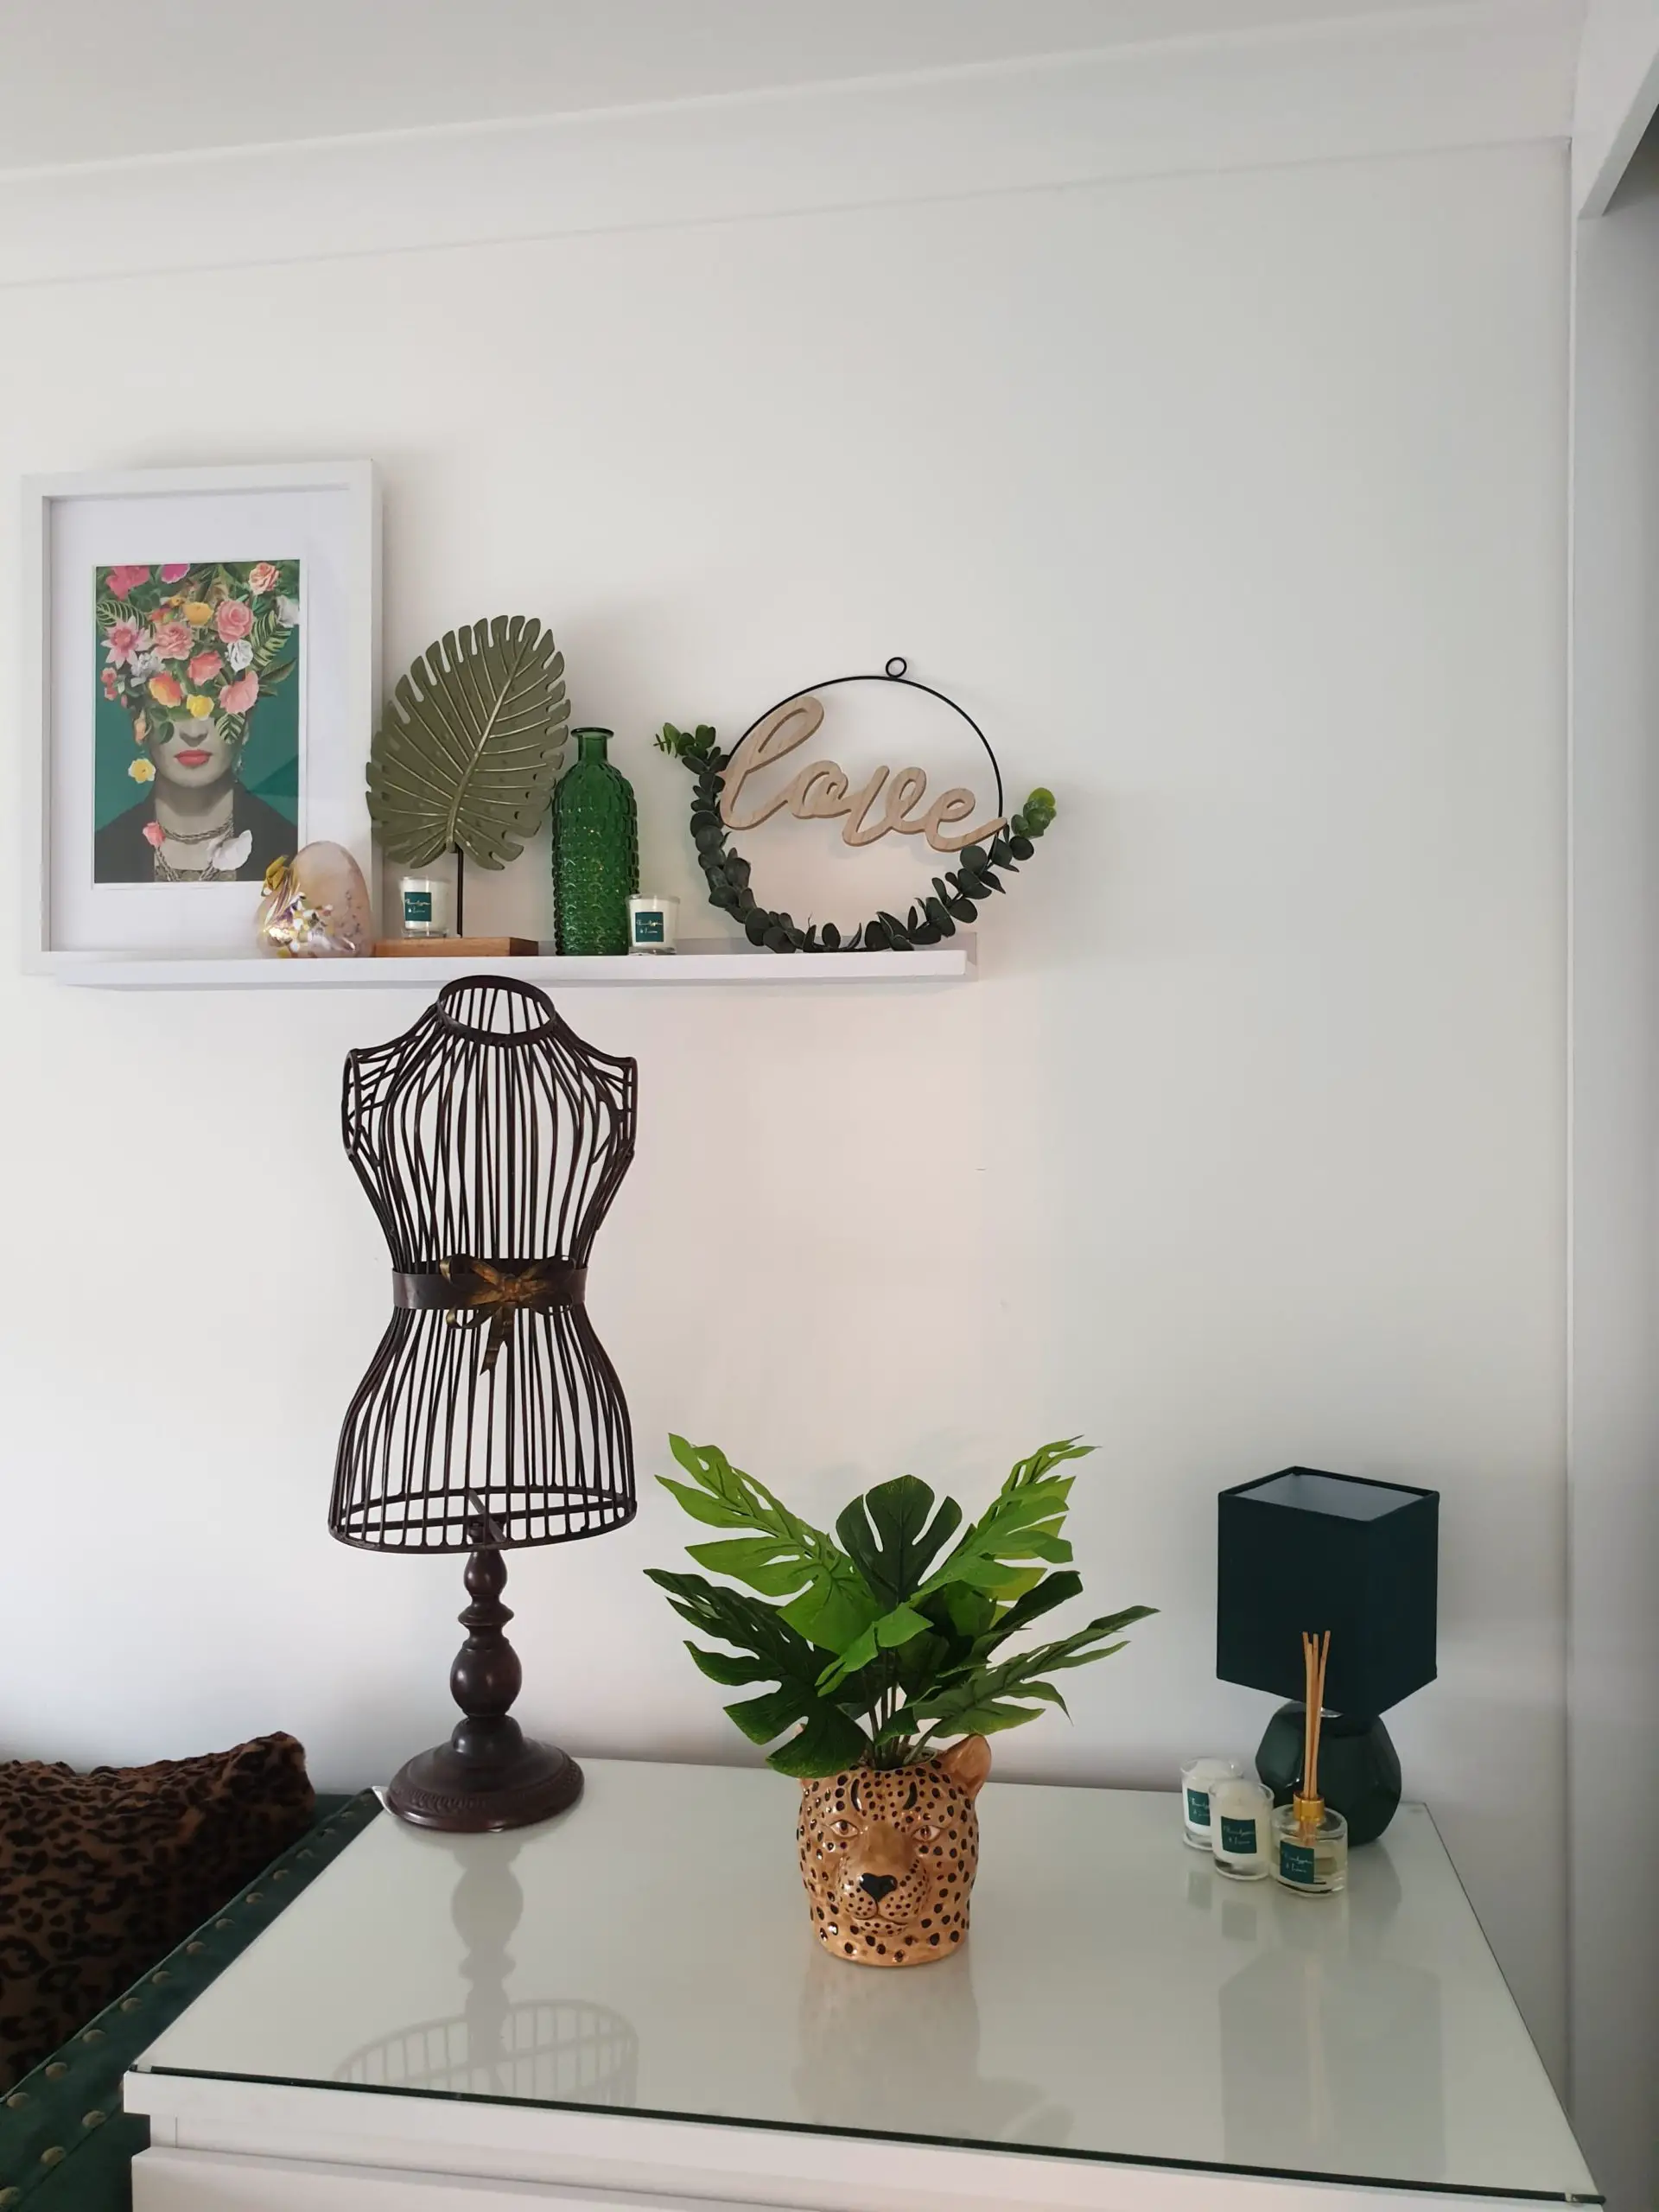 Plant and Wall Art on Desk